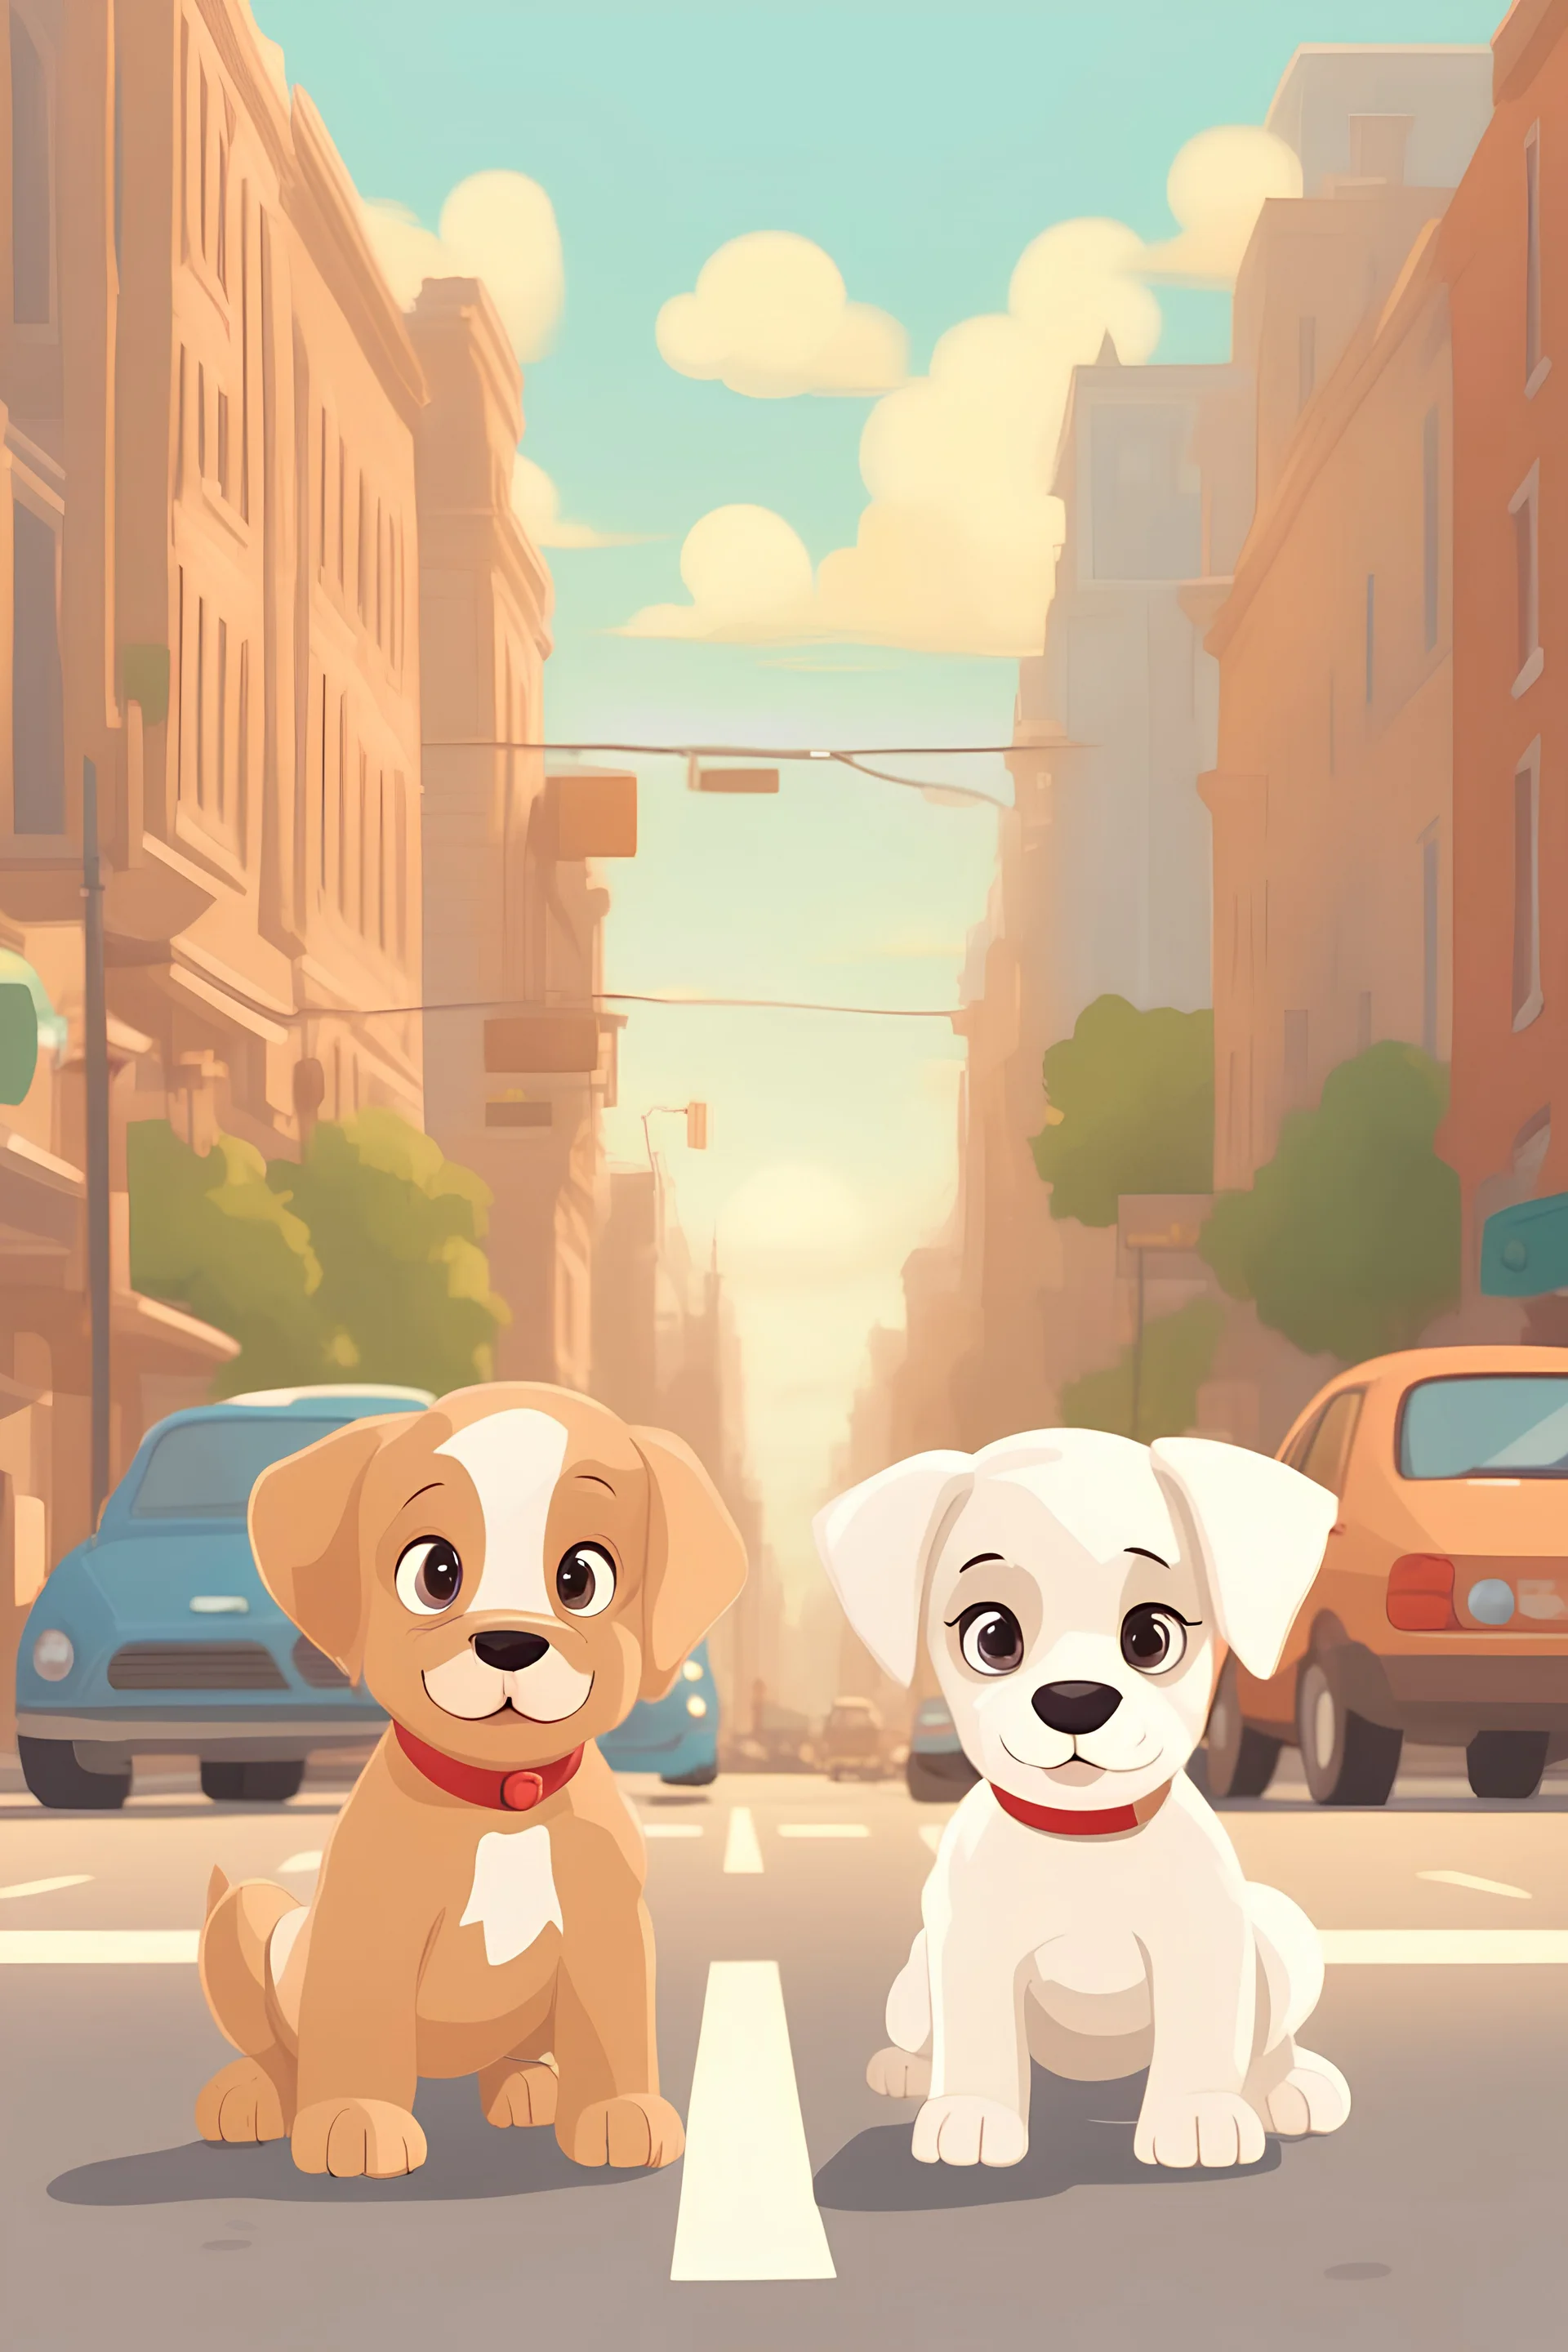 create an image of 1 light brown puppy and 1 white puppy together trying to cross the road in the town ; pixar style; daylight; bright colora